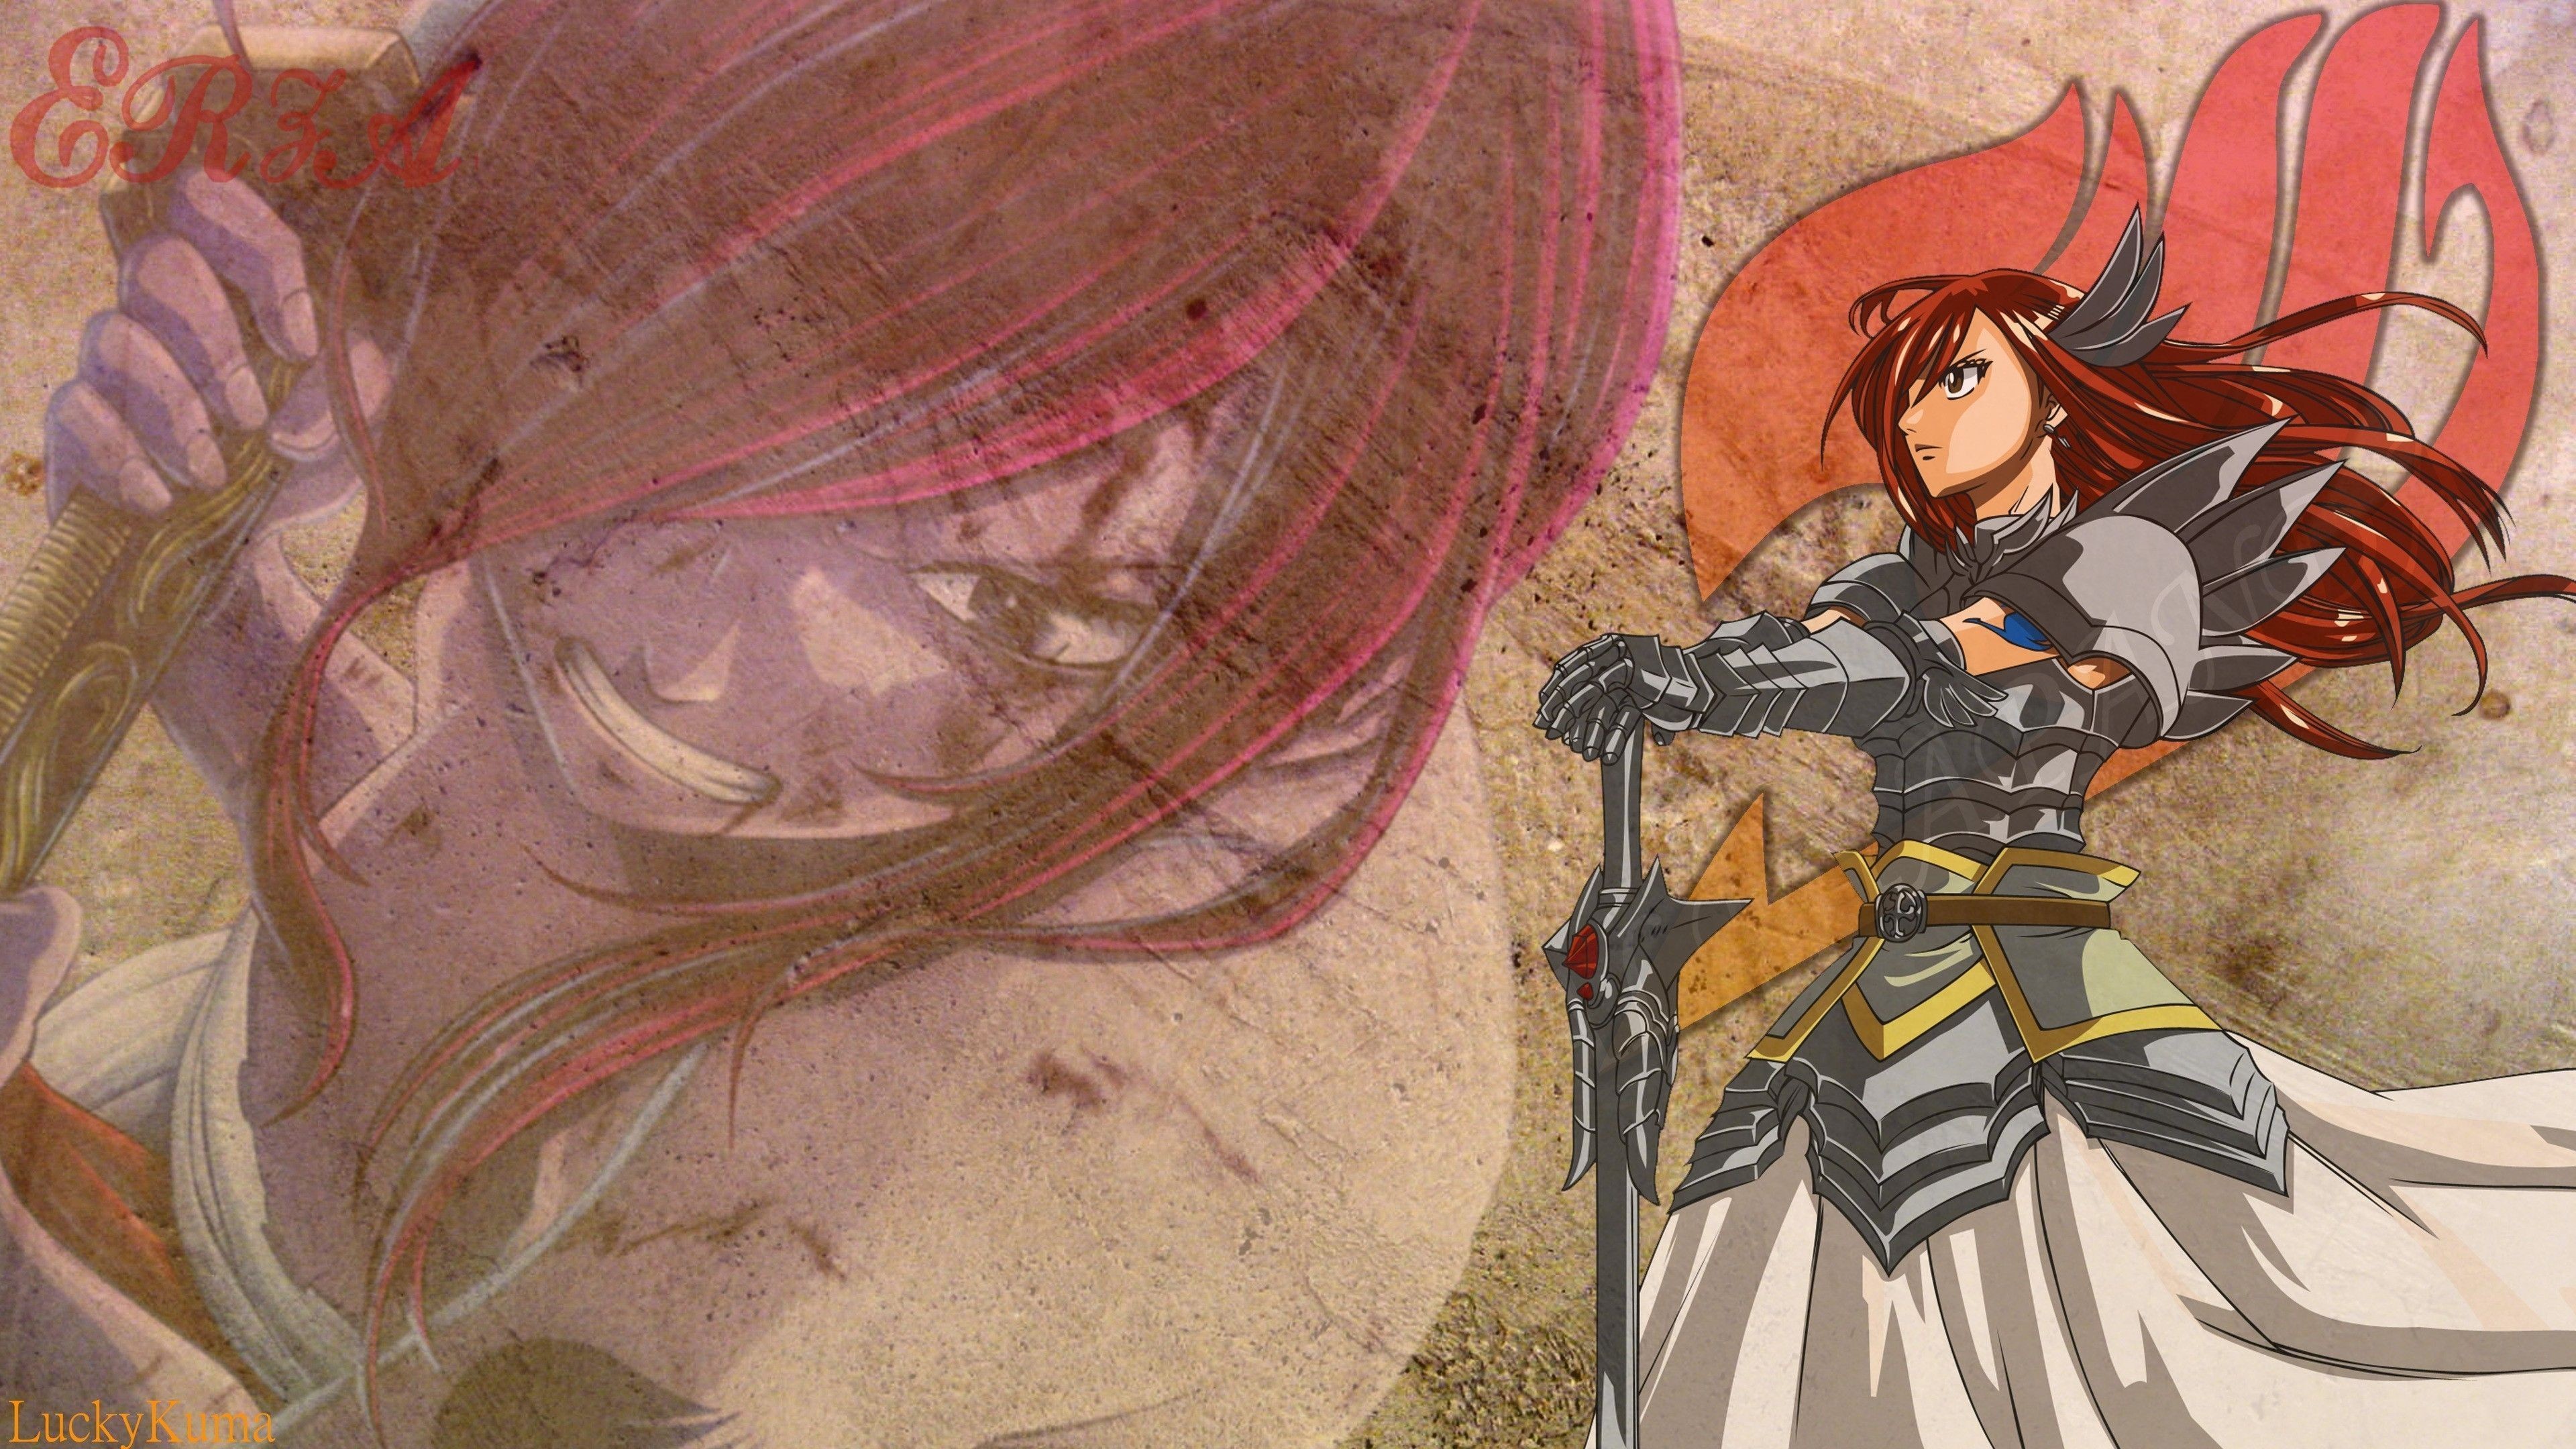 3840x2160 wallpaper.wiki-HD-Backgrounds-Erza-Scarlet-PIC-WPB006248